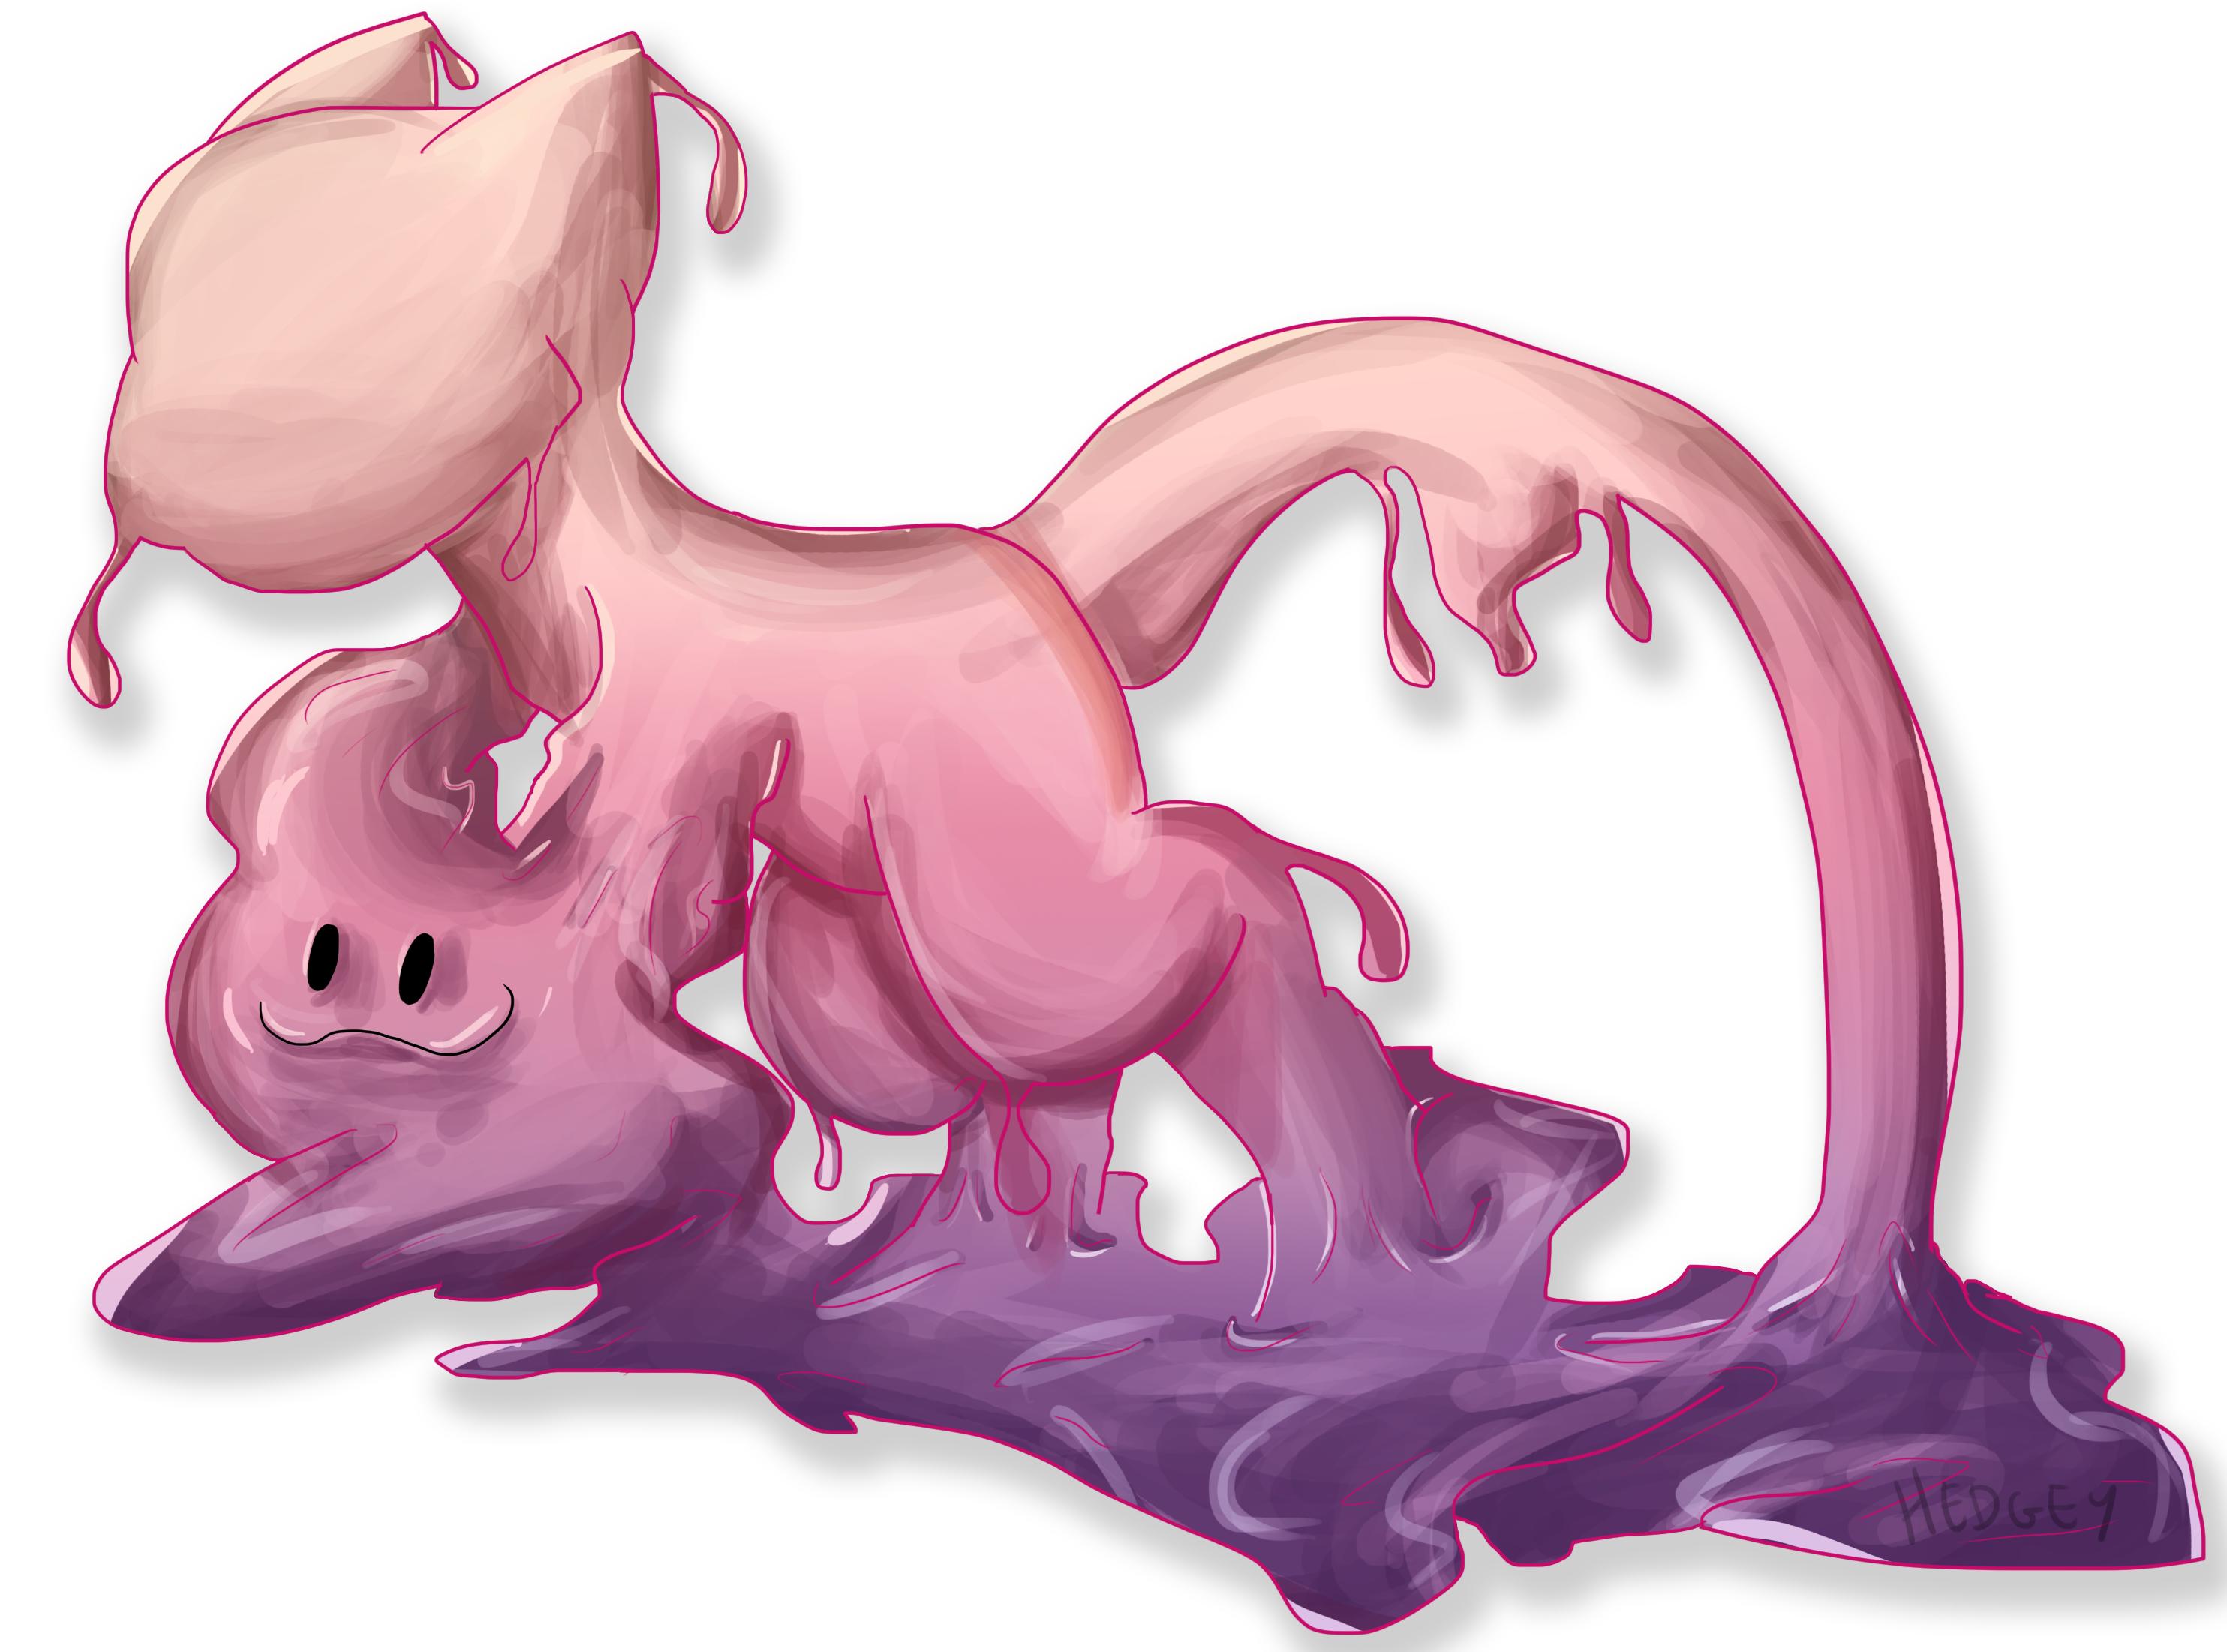 ditto-used-transform-into-mew-by-hedgey